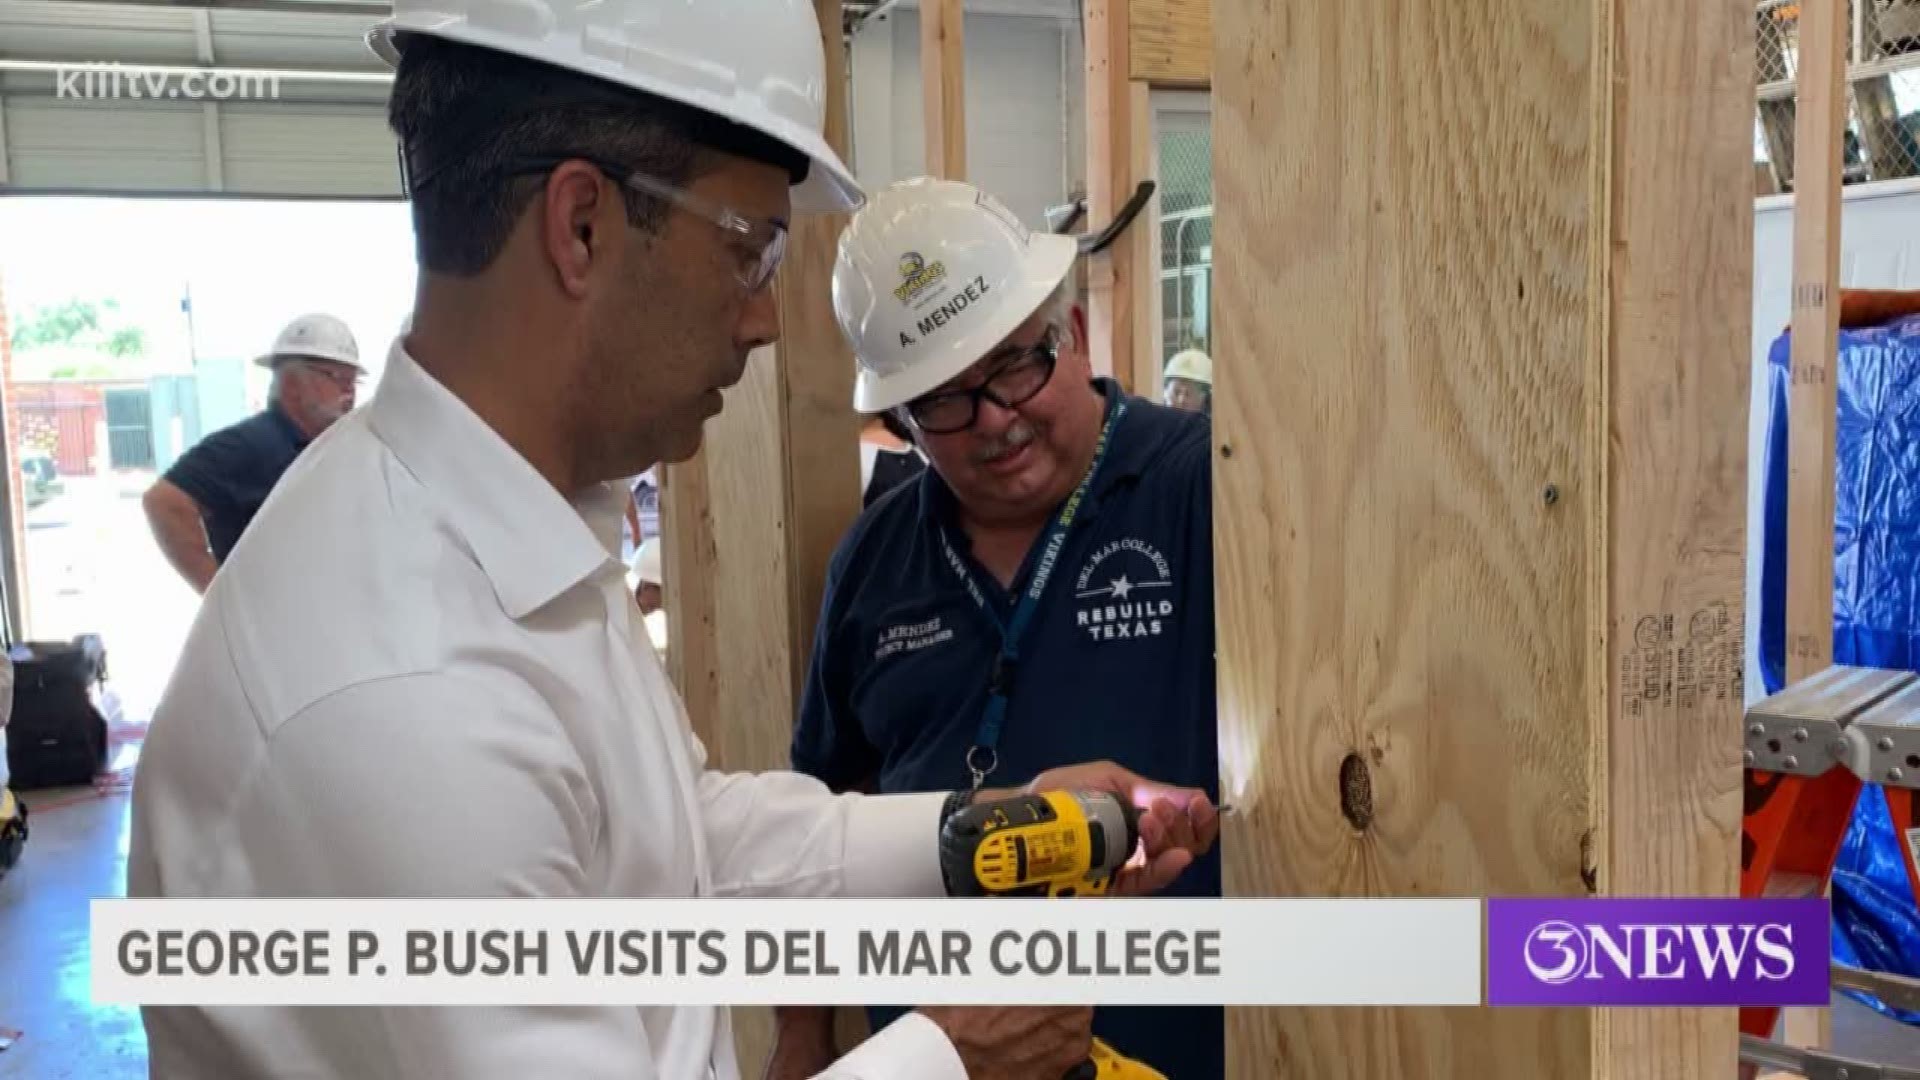 Texas Land Commissioner George P. Bush is on a trip to visit 50 school campuses across the state. On Thursday, Commissioner Bush stopped at Del Mar College.